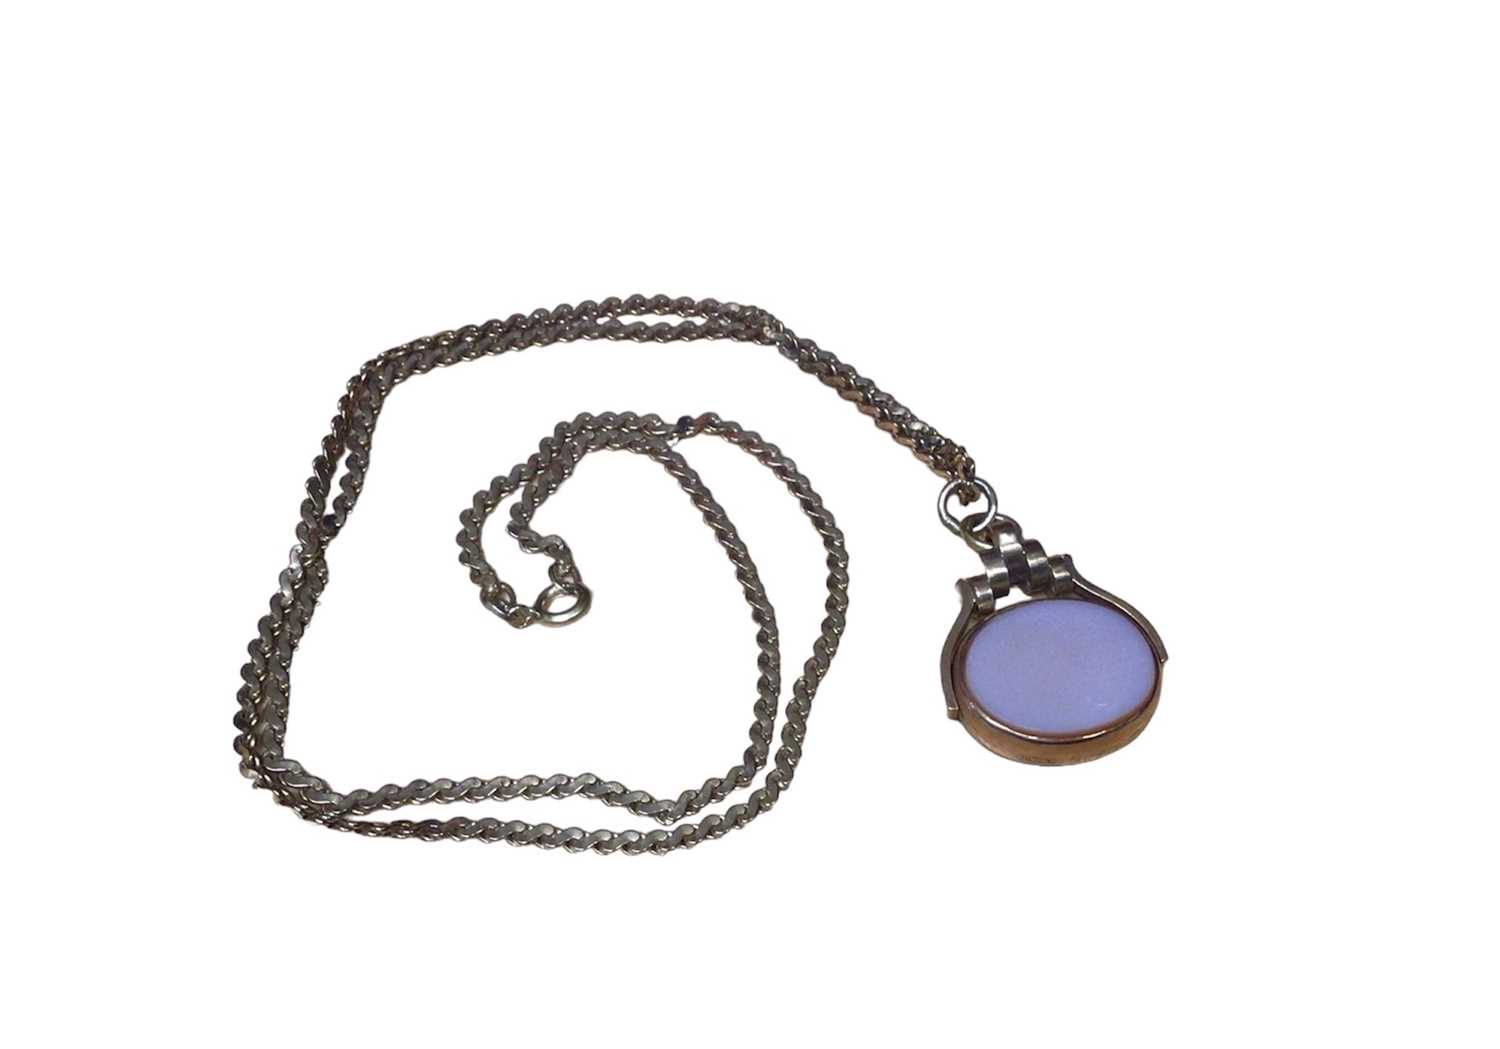 Early 20th century gold mounted agate revolving fob pendant on a modern 9ct gold chain